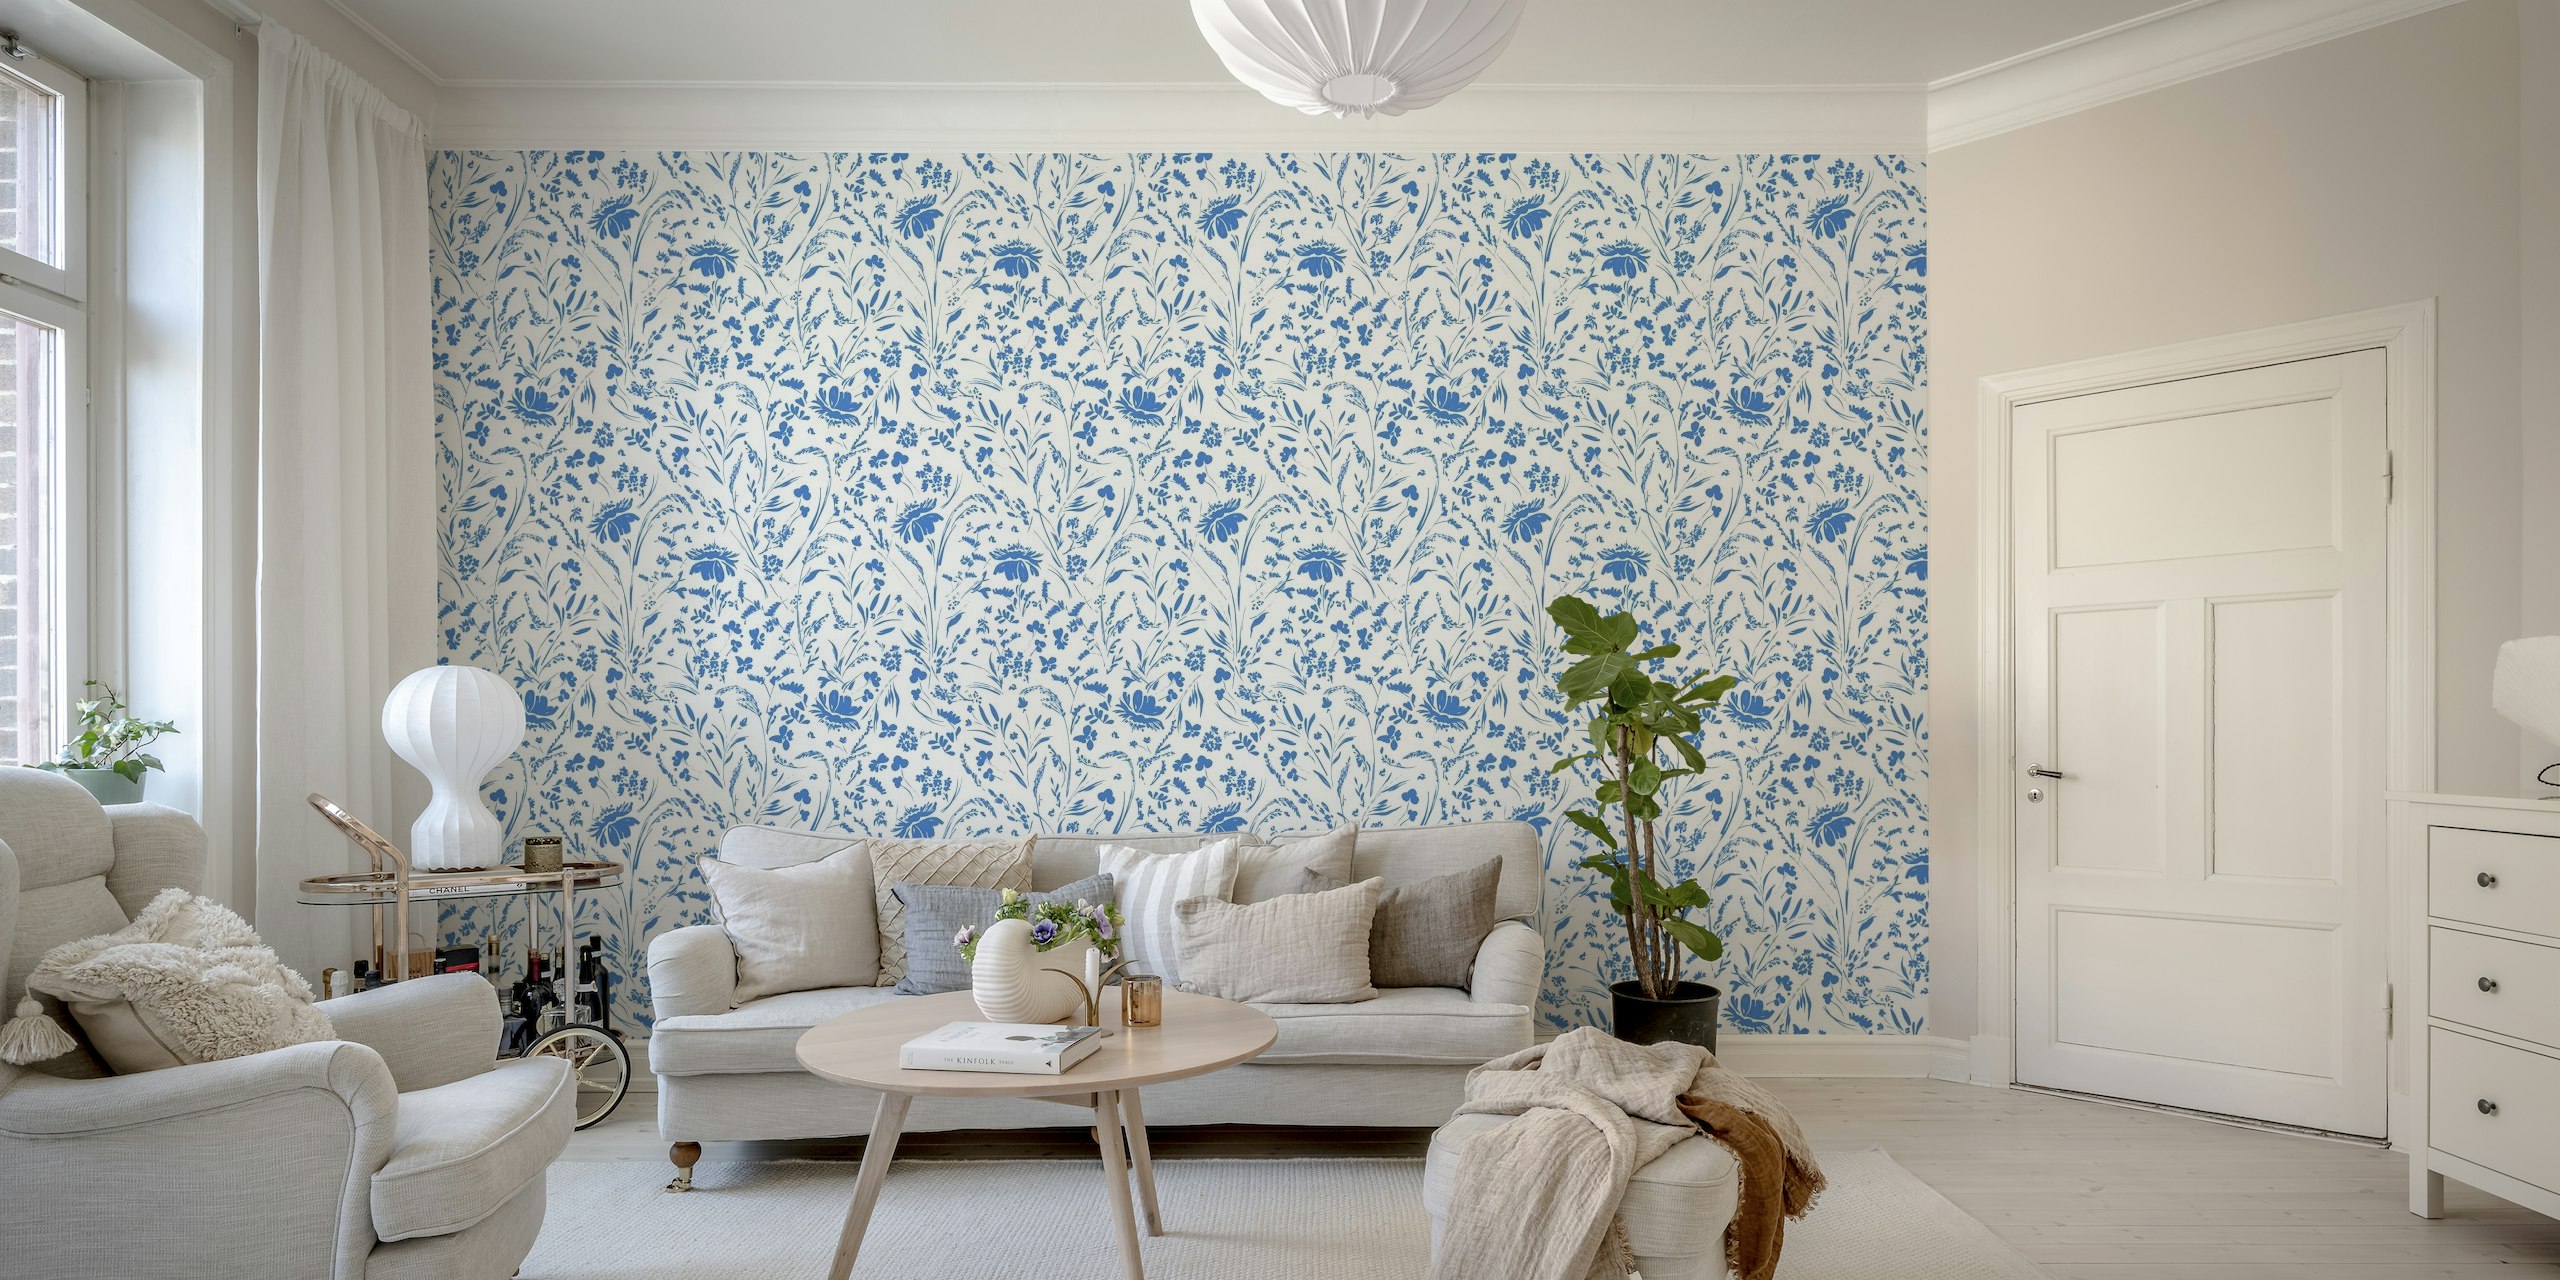 Blue and white floral wall mural featuring elegant blooms and foliage